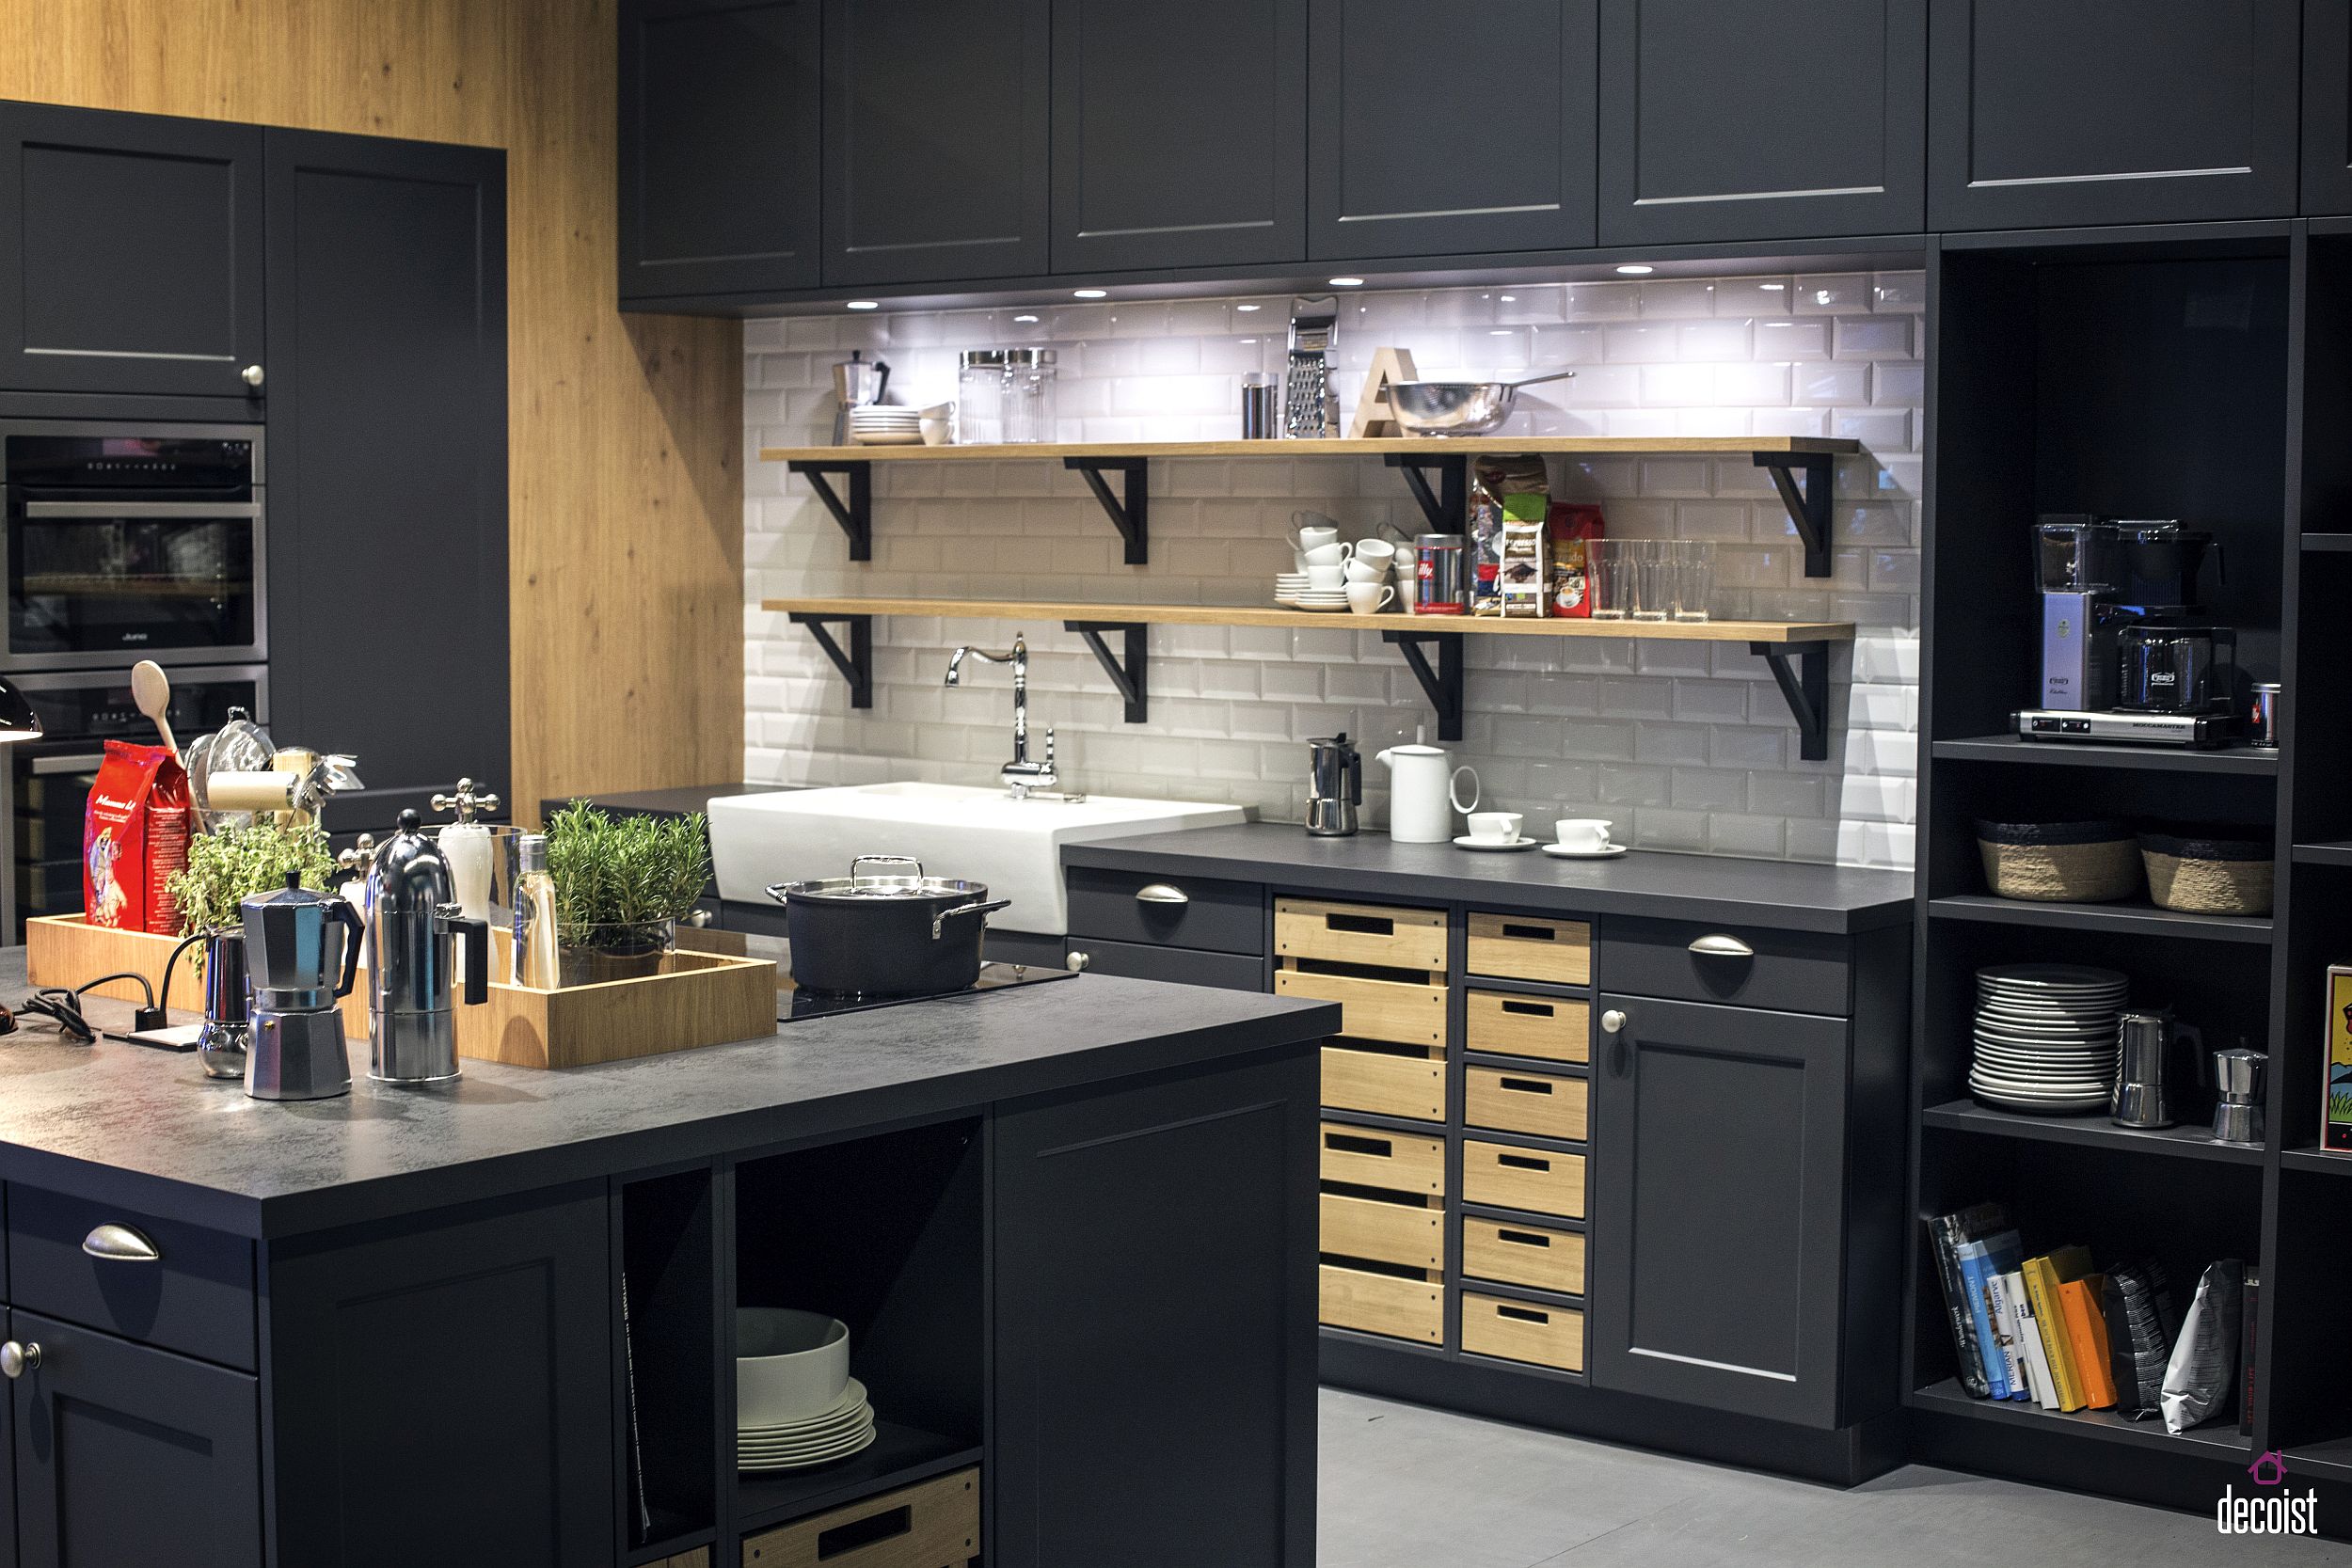 Beautiful kitchen fom Schuller has a classic modern vibe along with gray goodness